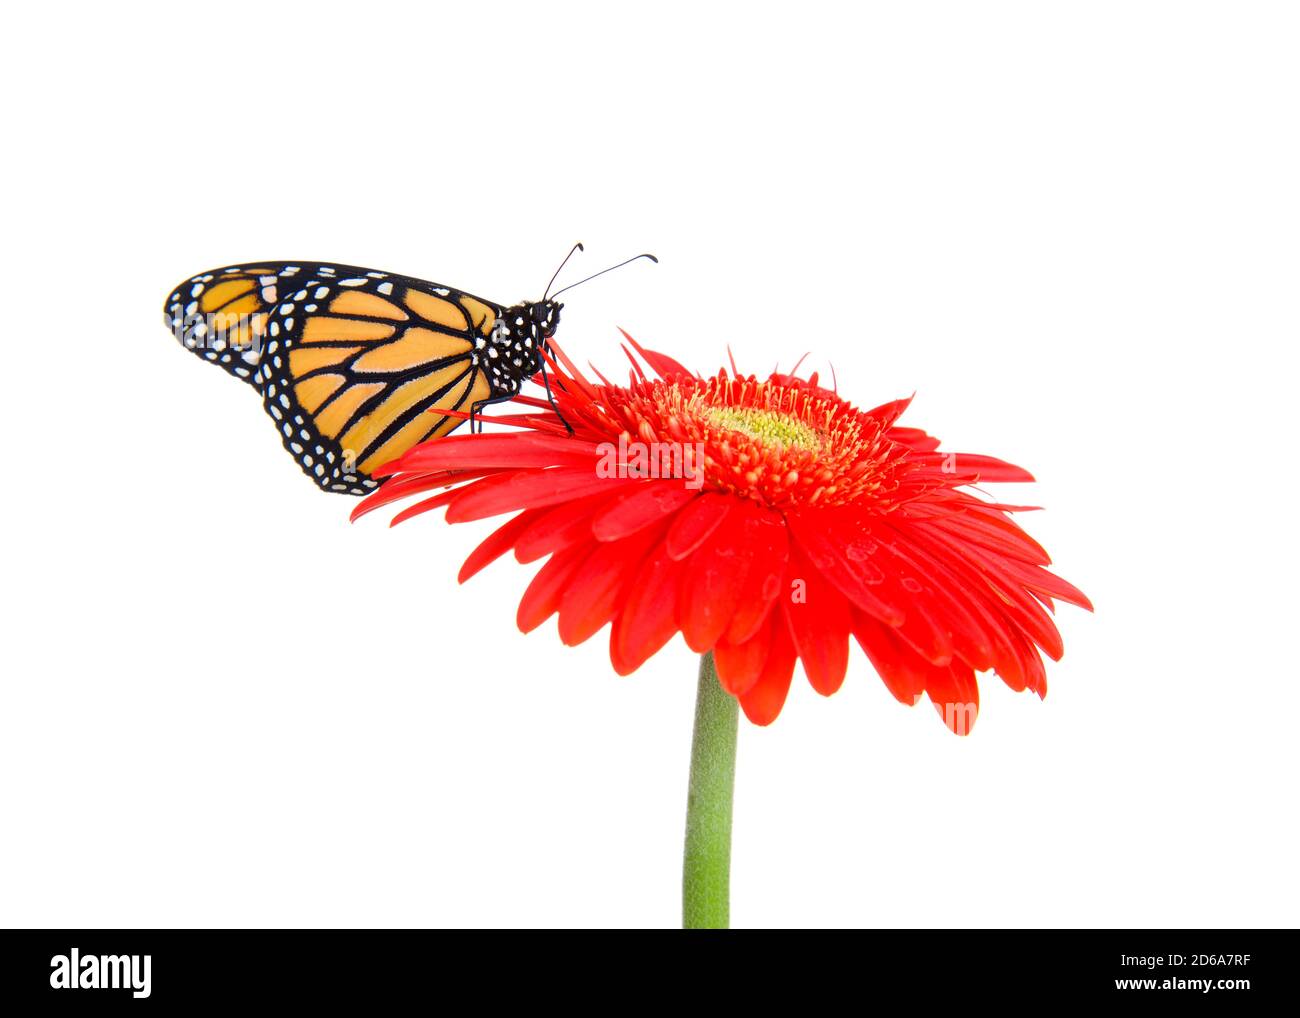 Close up profile view of one Monarch butterfly standing on a reddish orange Gerbera Daisy, Isolated on white. Stock Photo